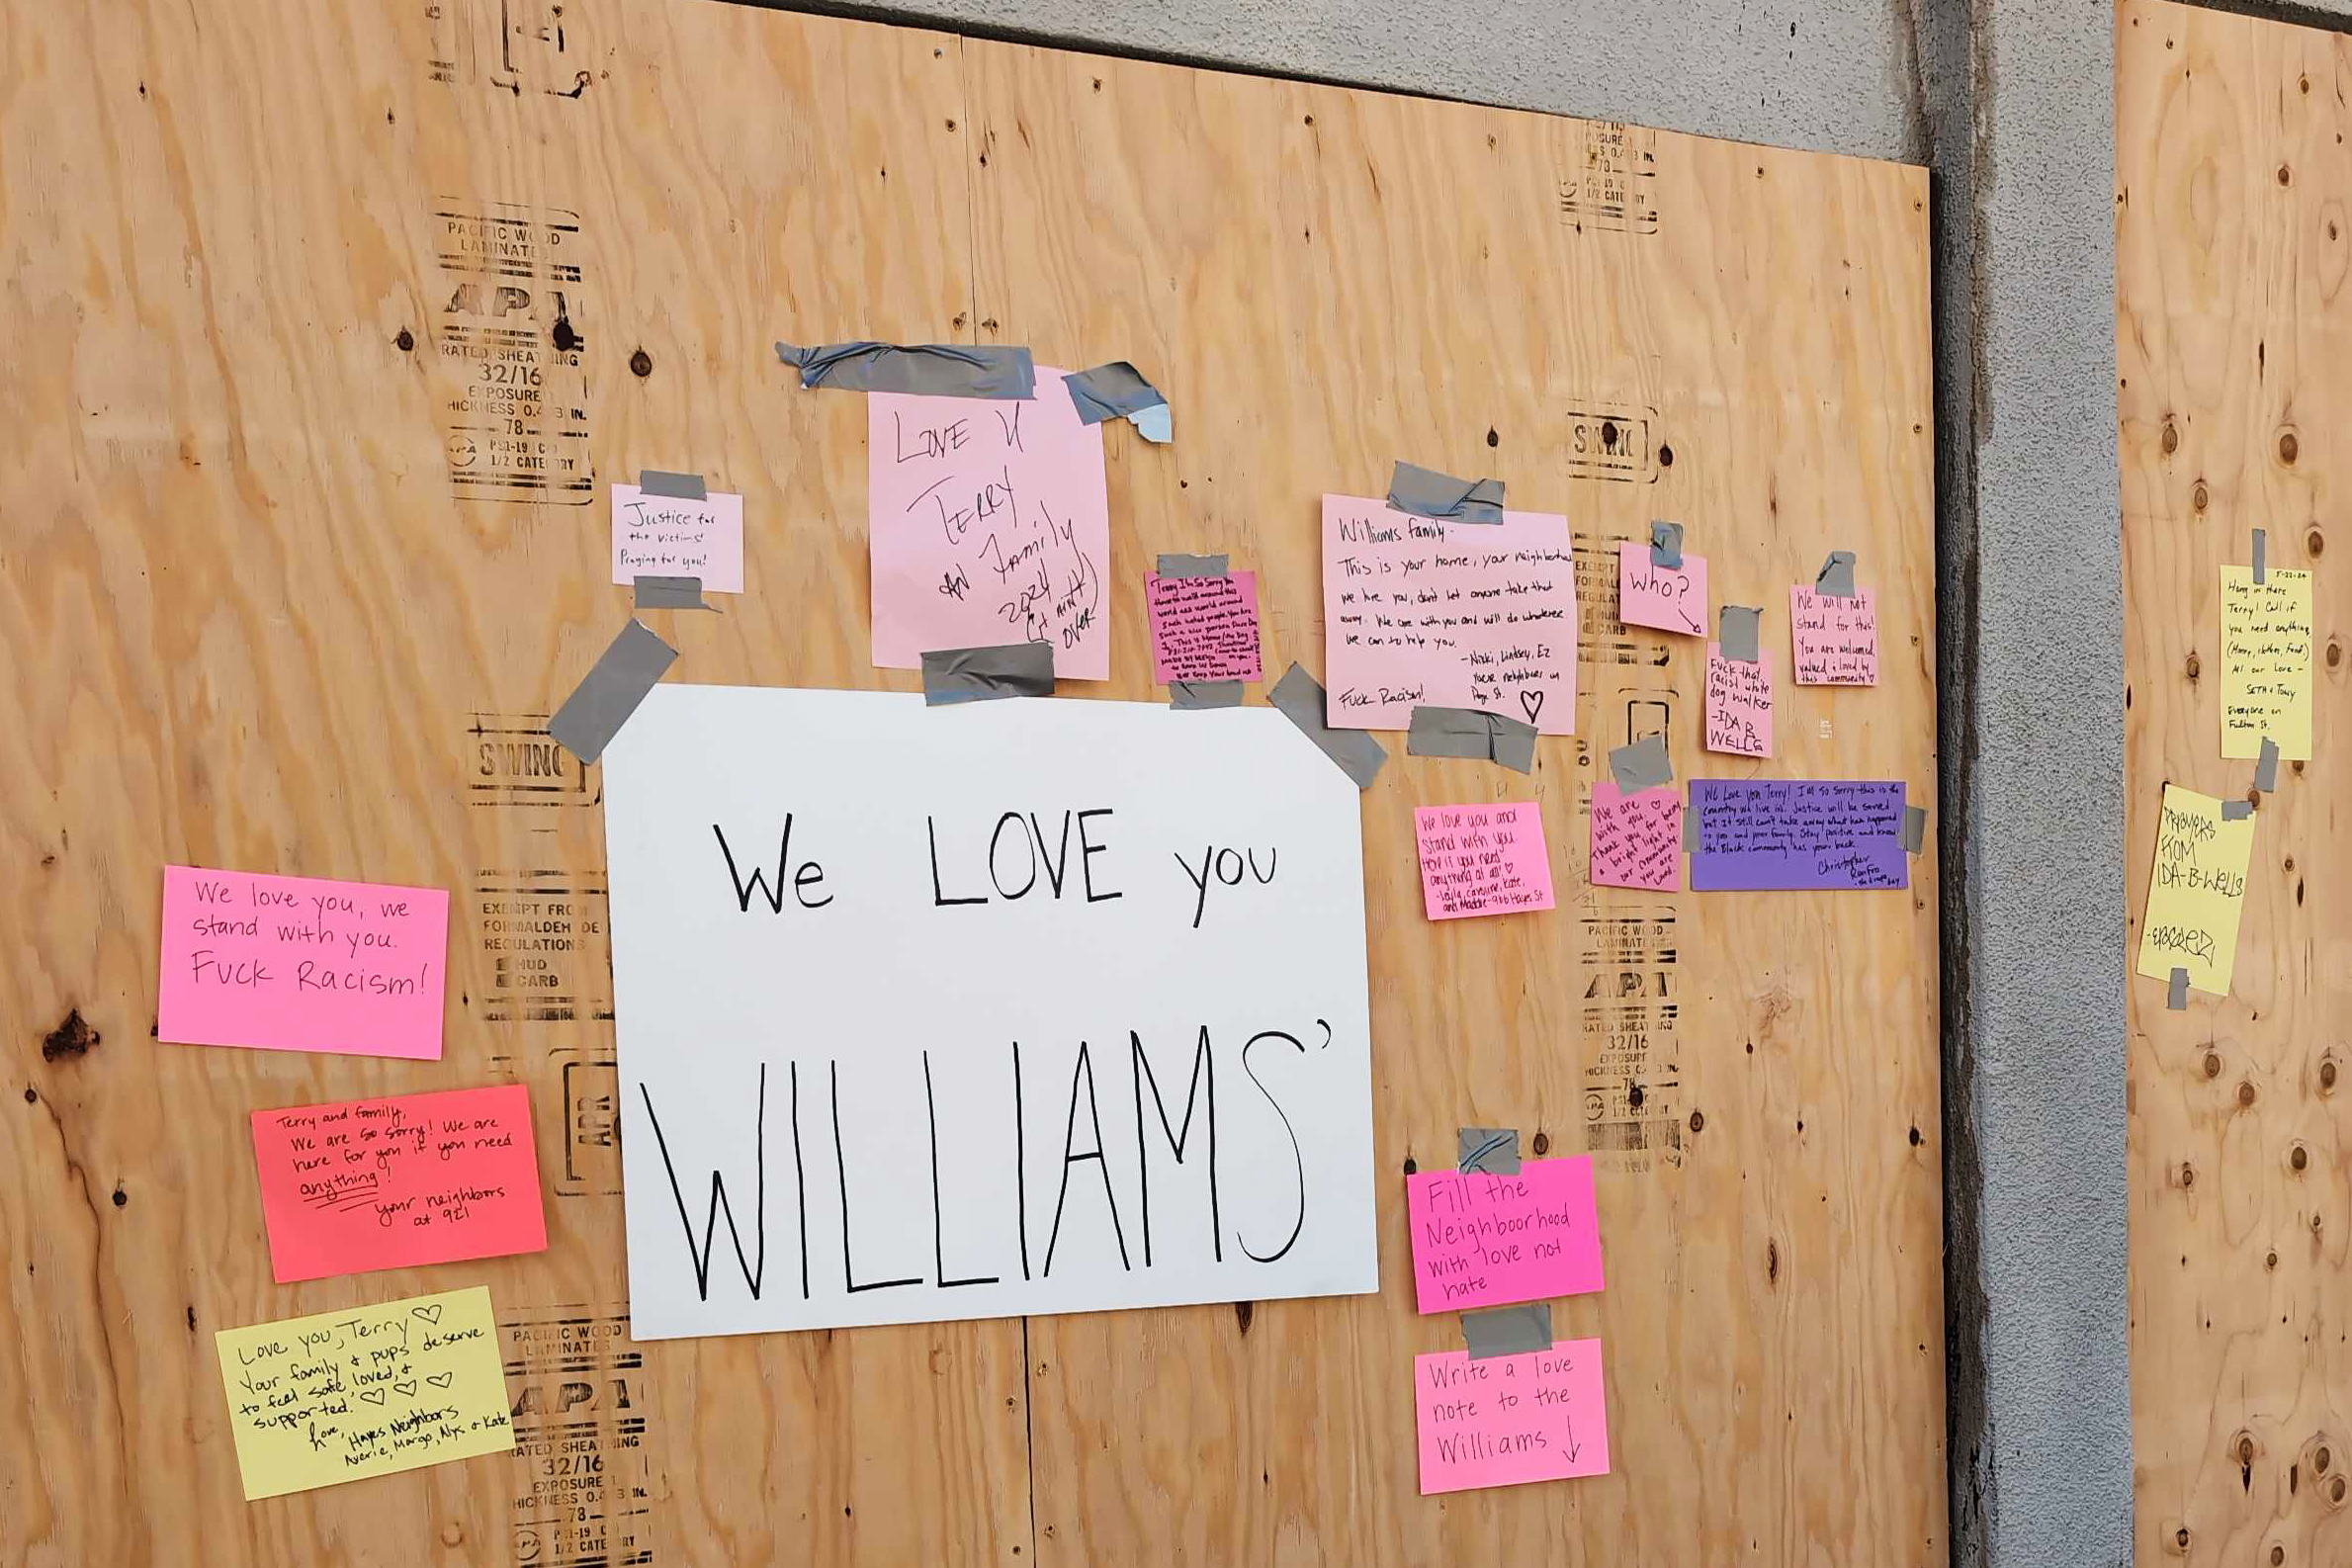 A plywood wall covered with various handwritten notes of support taped on. A large central sign reads, "We LOVE you WILLIAMS'."